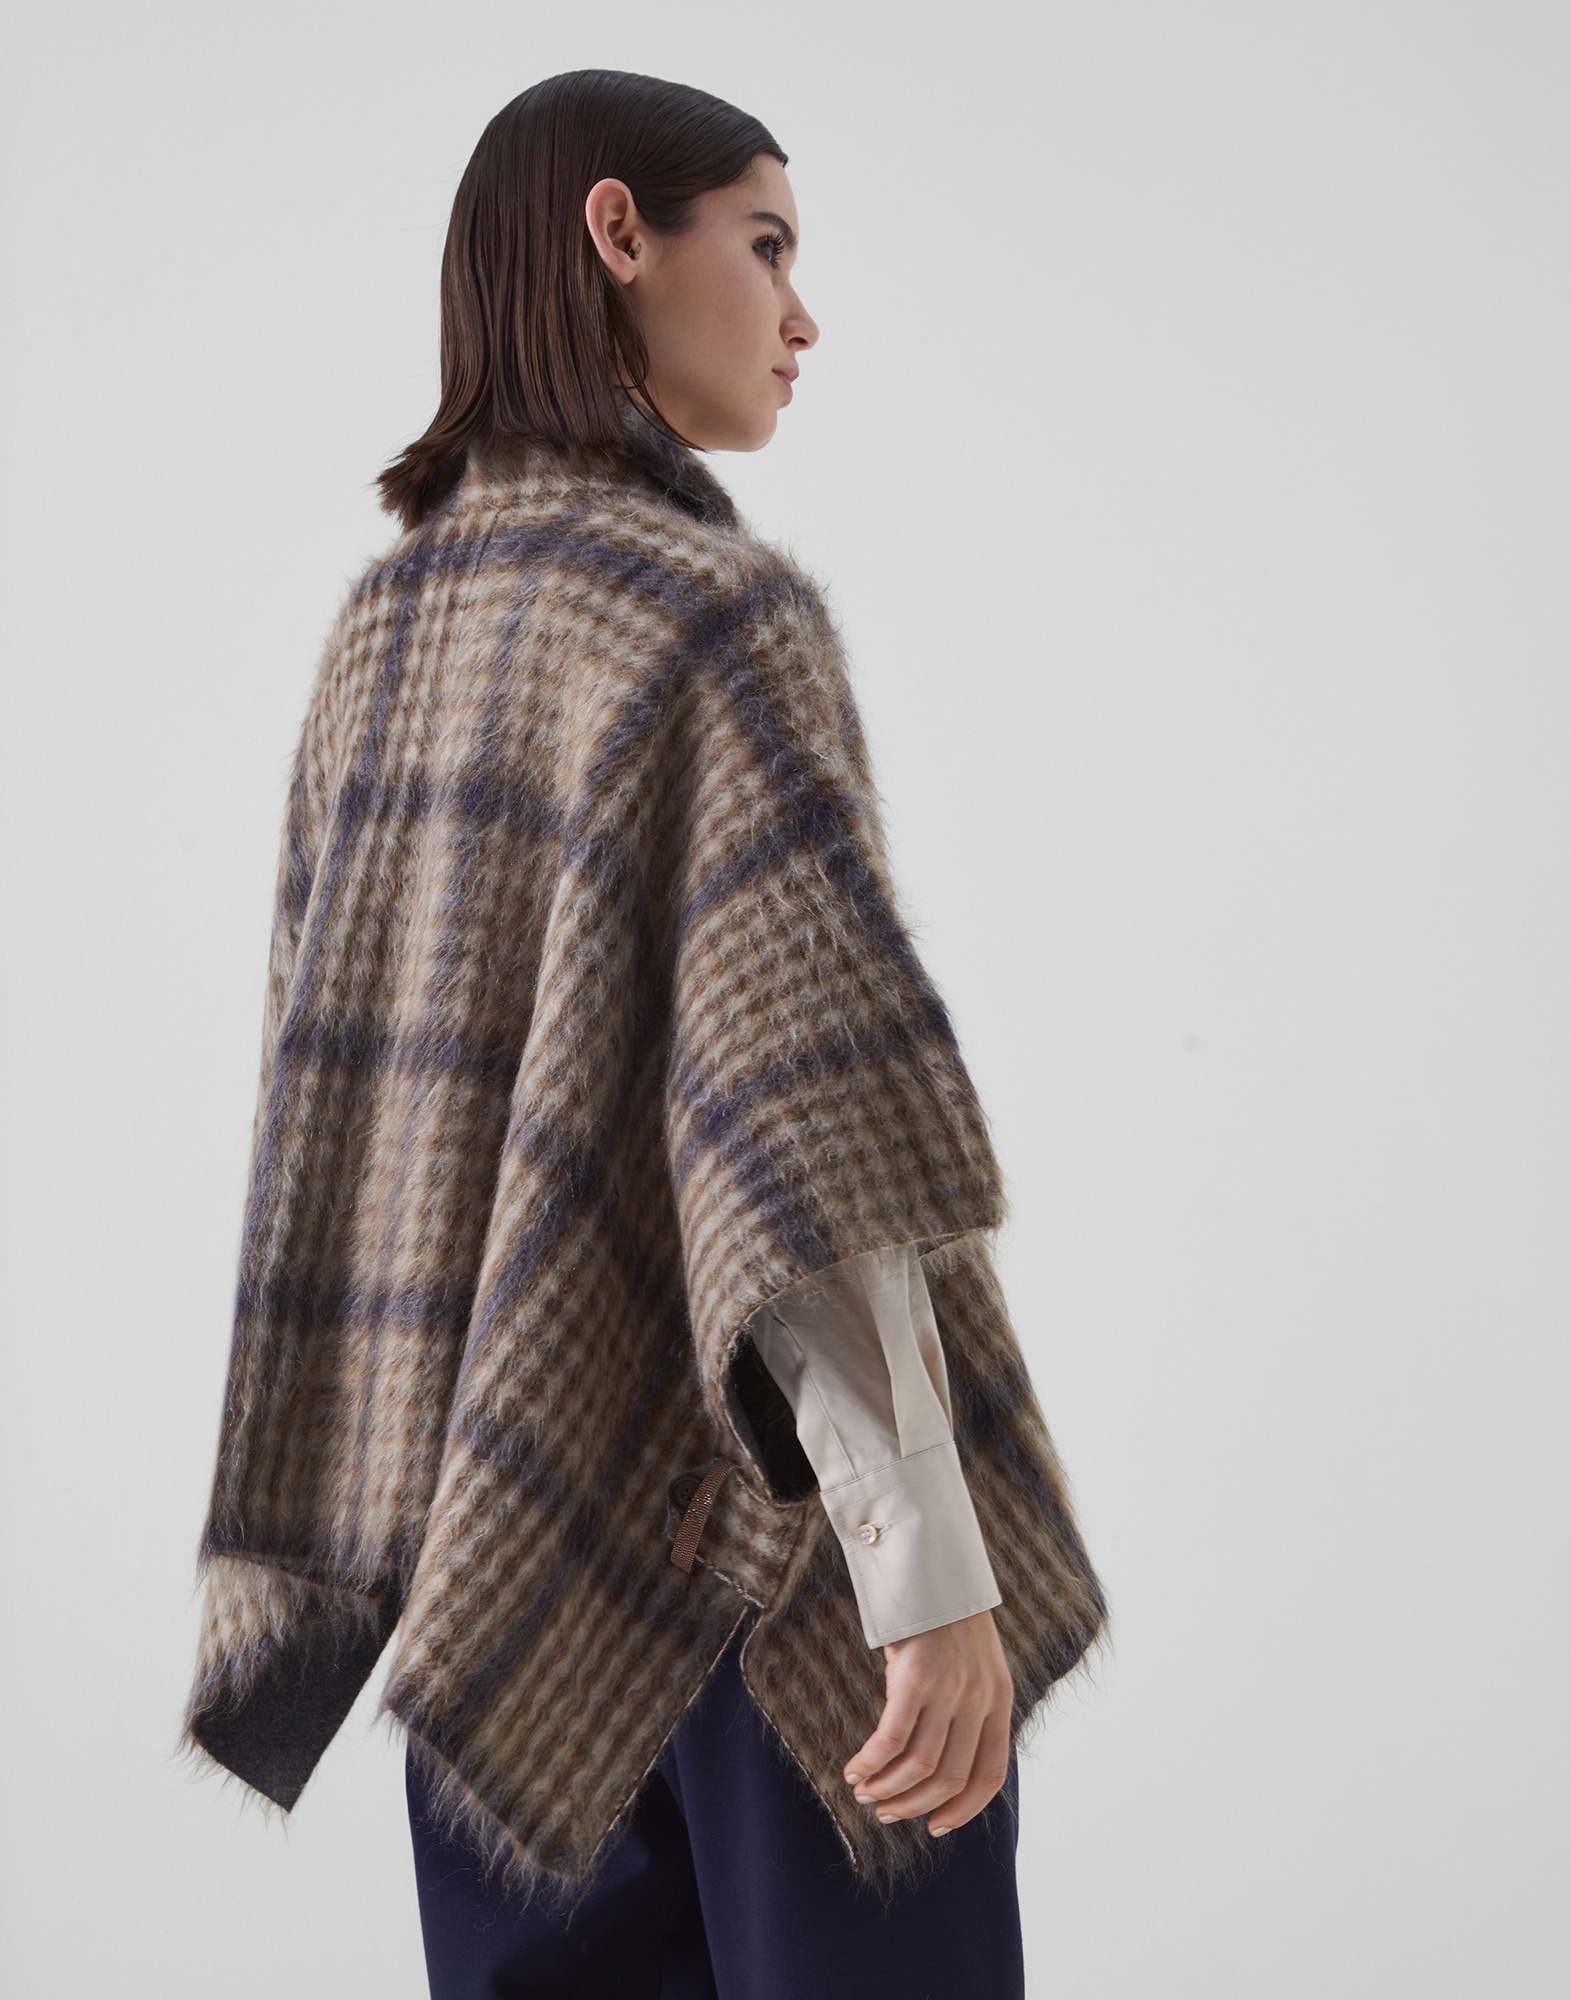 Tartan intarsia double knit cape in virgin wool, mohair and cashmere - 2